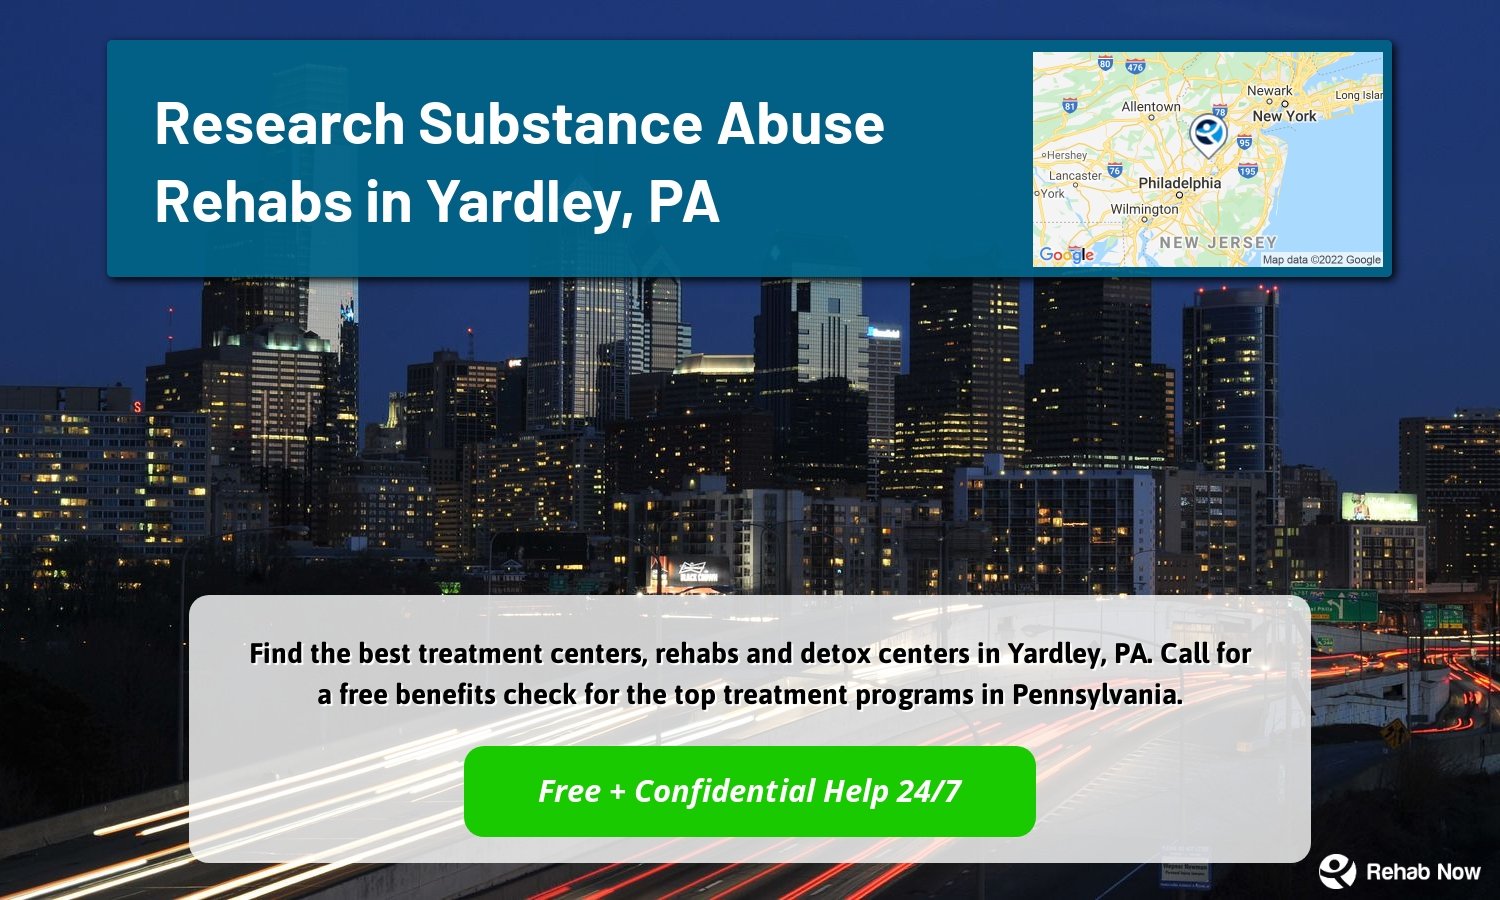 Find the best treatment centers, rehabs and detox centers in Yardley, PA. Call for a free benefits check for the top treatment programs in Pennsylvania.